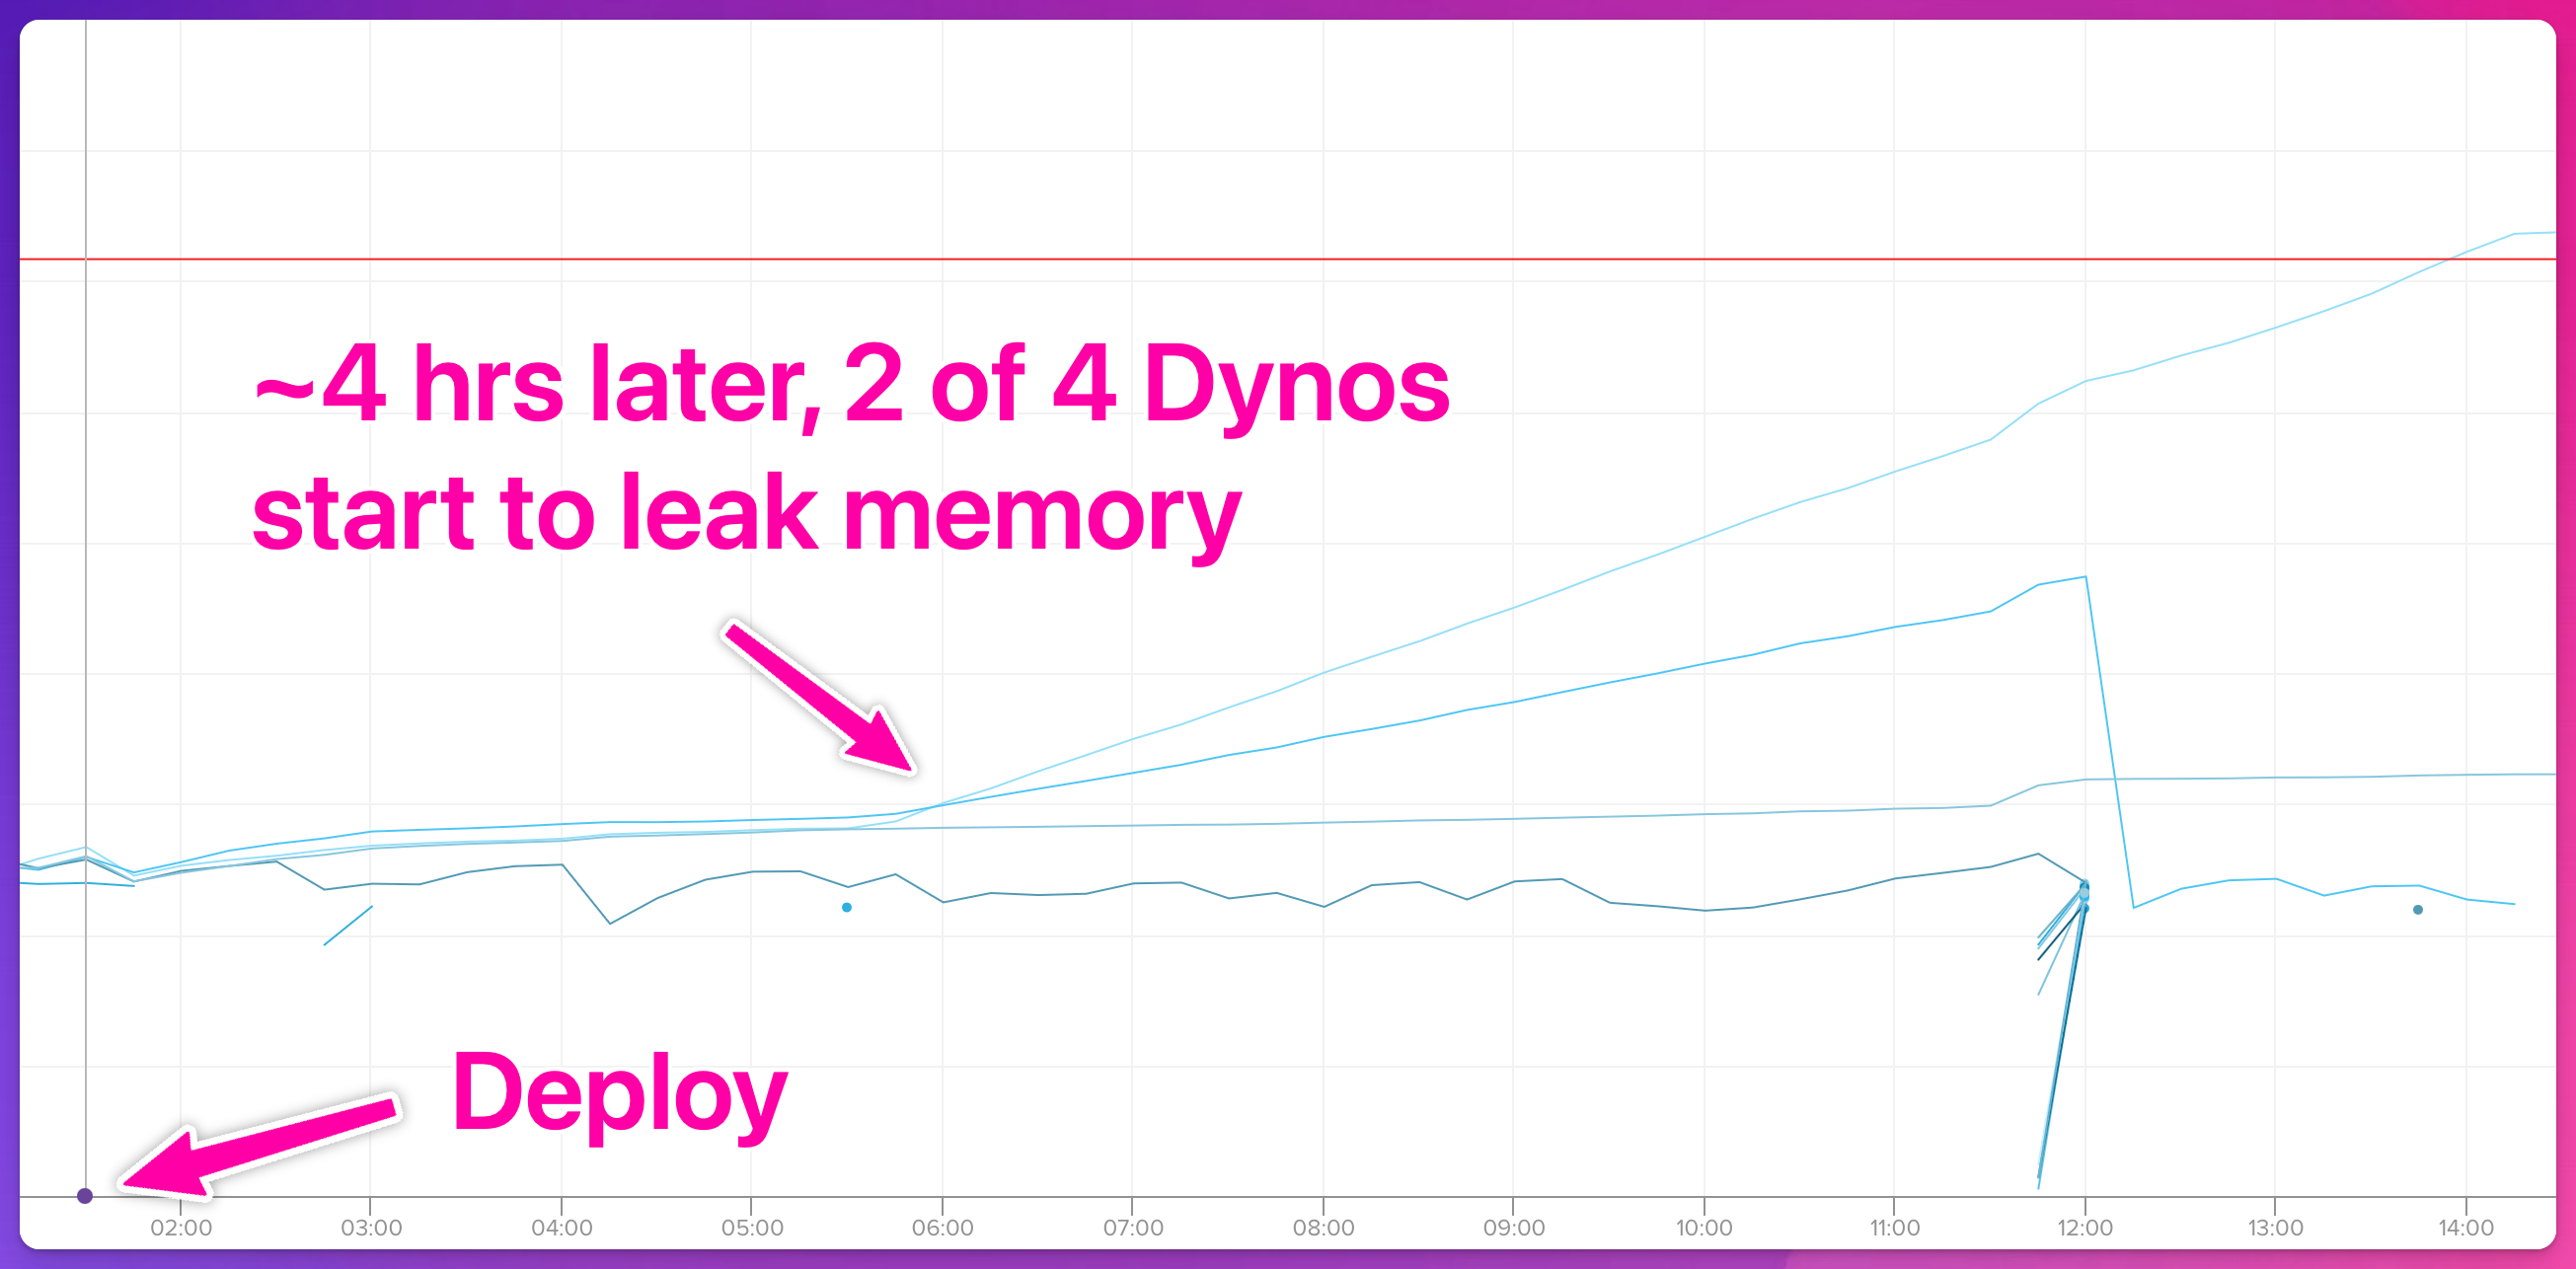 Graph of memory flat for 4 hours, and then starting to rise